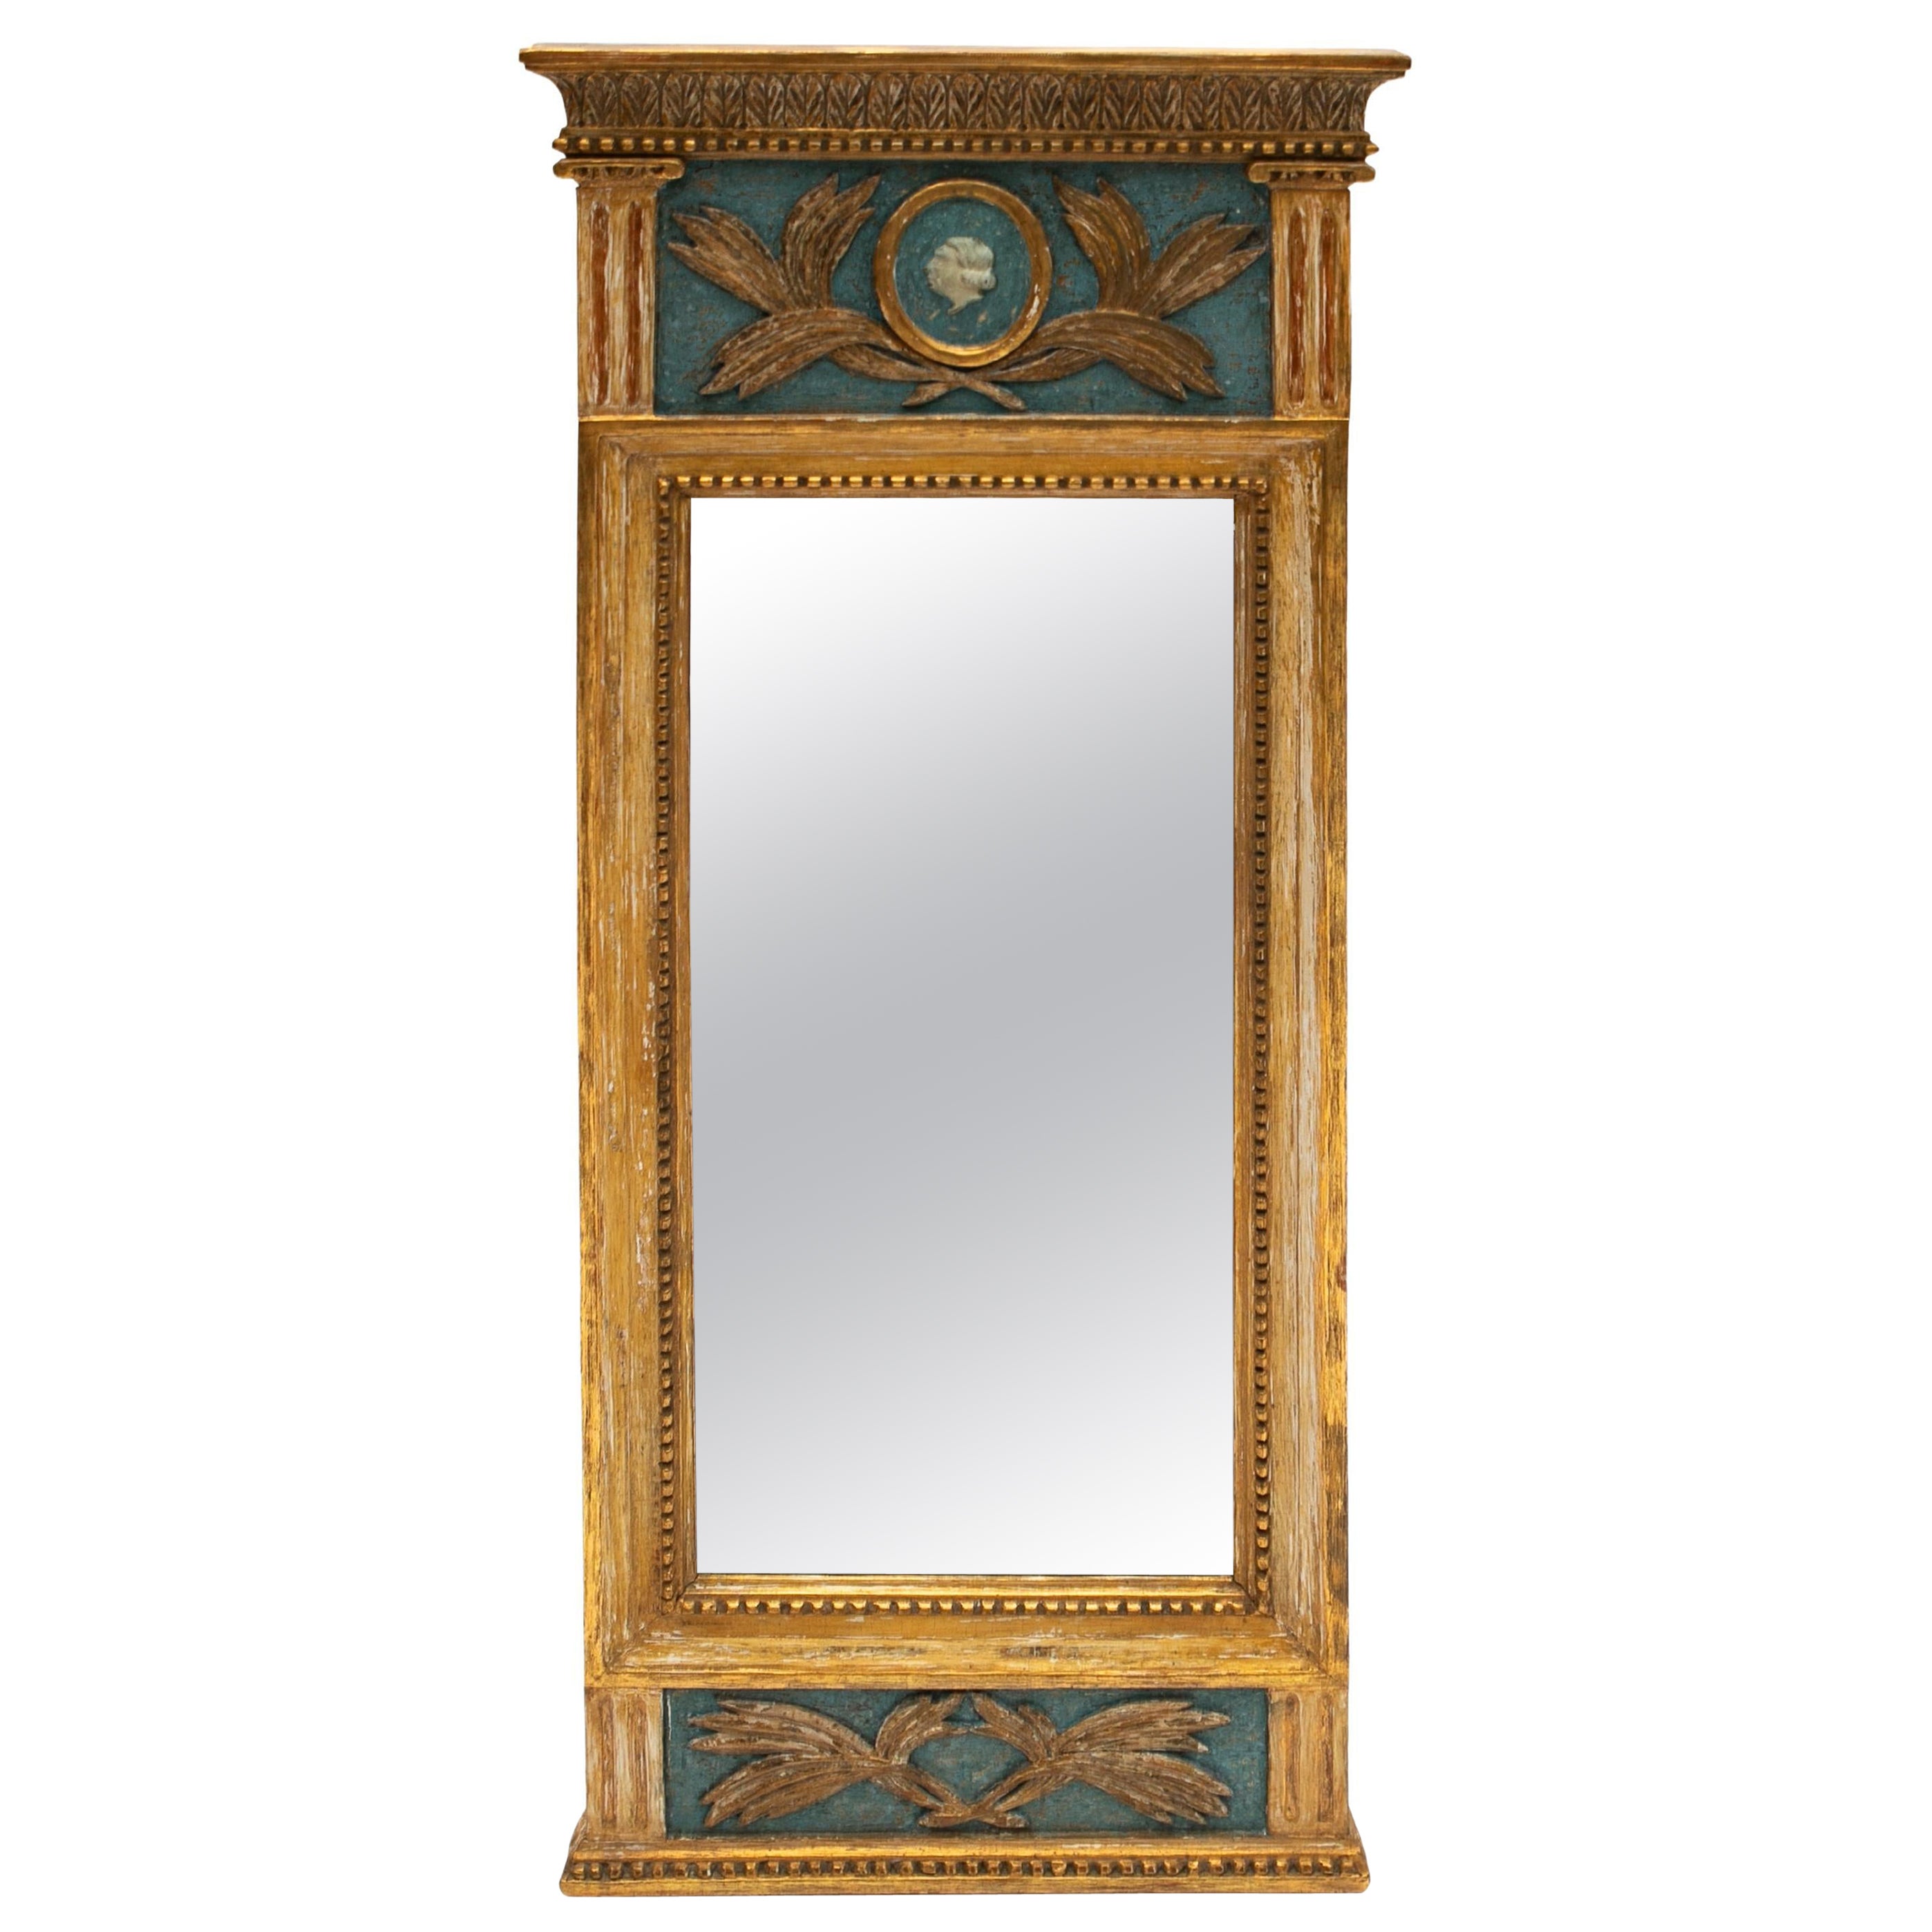 Late 18th Century Swedish Gustavian Gilded Wall Mirror For Sale